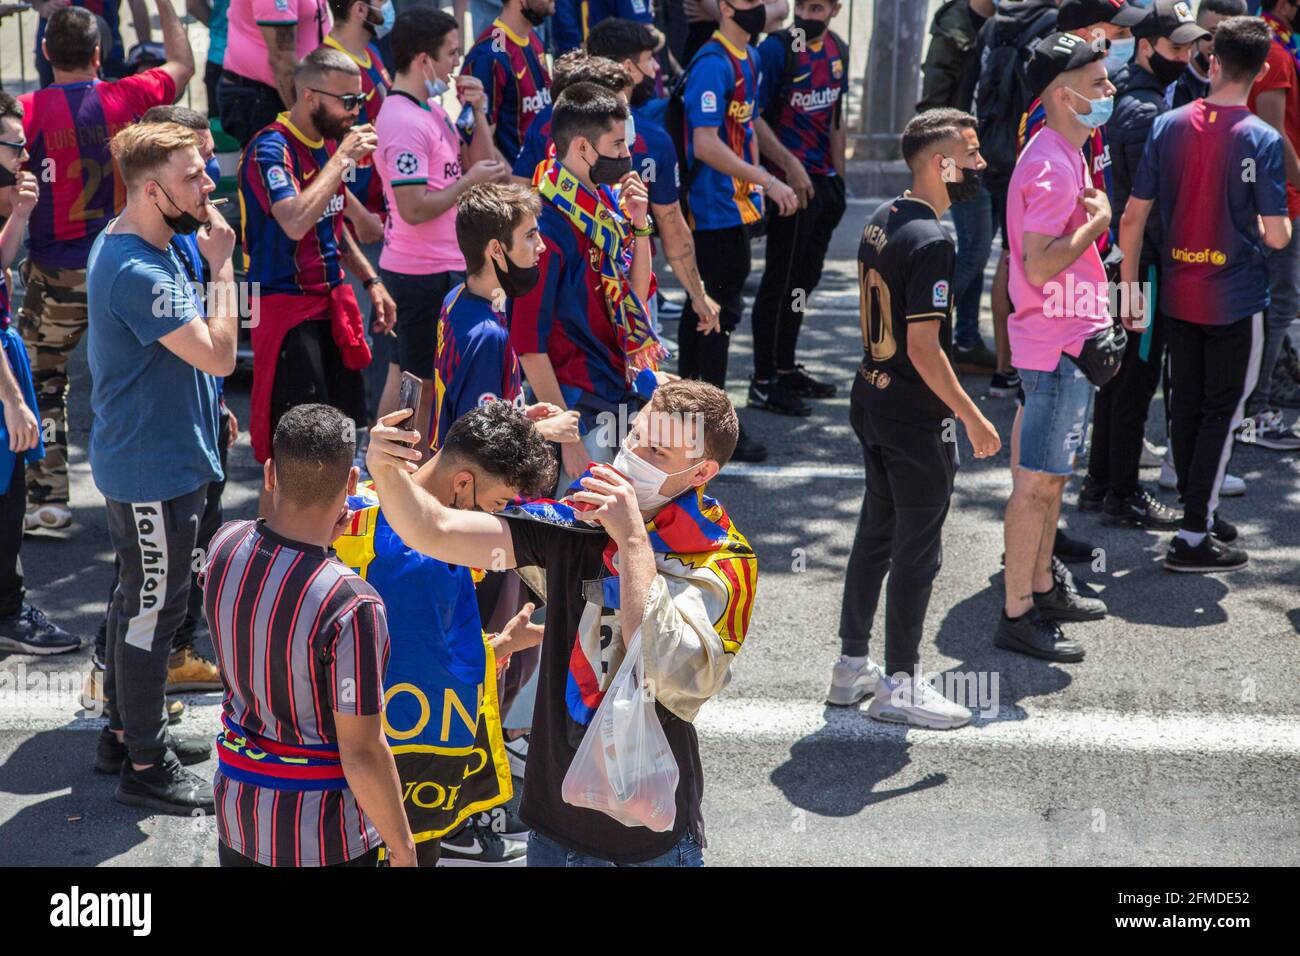 Football Club Barcelona fan takes a selfie. The ultras supporter group of  Football Club Barcelona, Boixos Nois (Crazy Boys) have gathered outside the  Camp Nou stadium to motivate the team before the